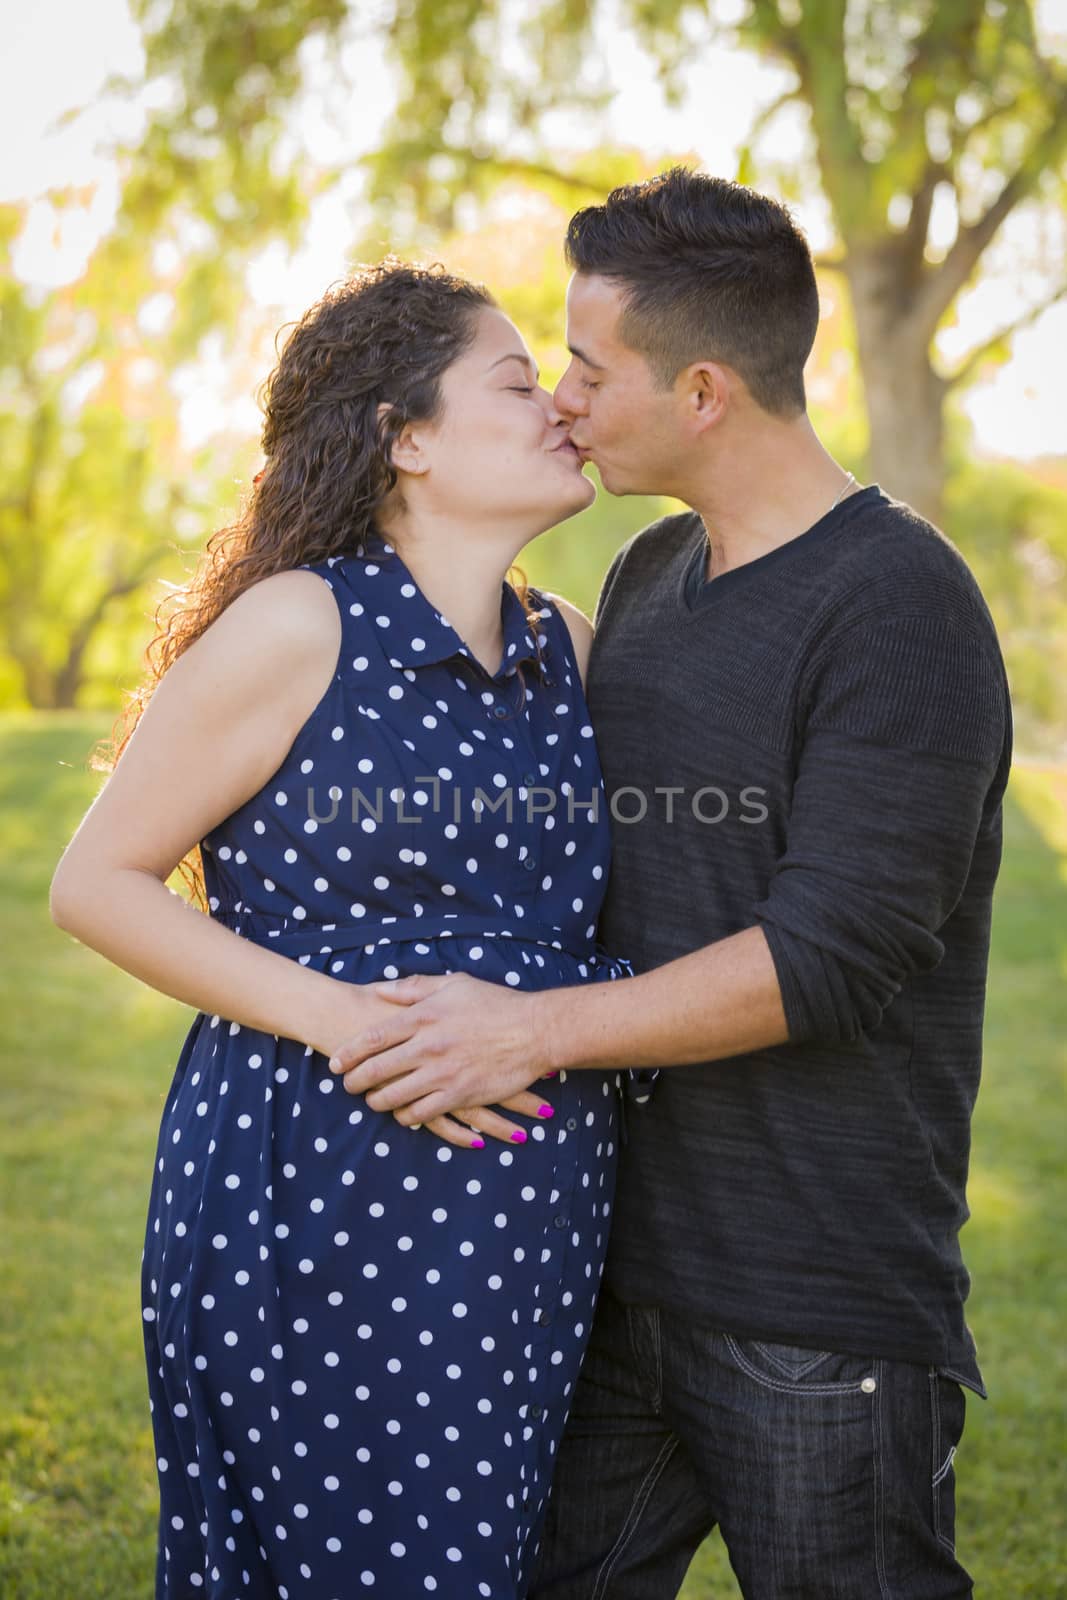 Hispanic Man Kisses His Pregnant Wife and Feels Their Baby Kick Outdoors At the Park.